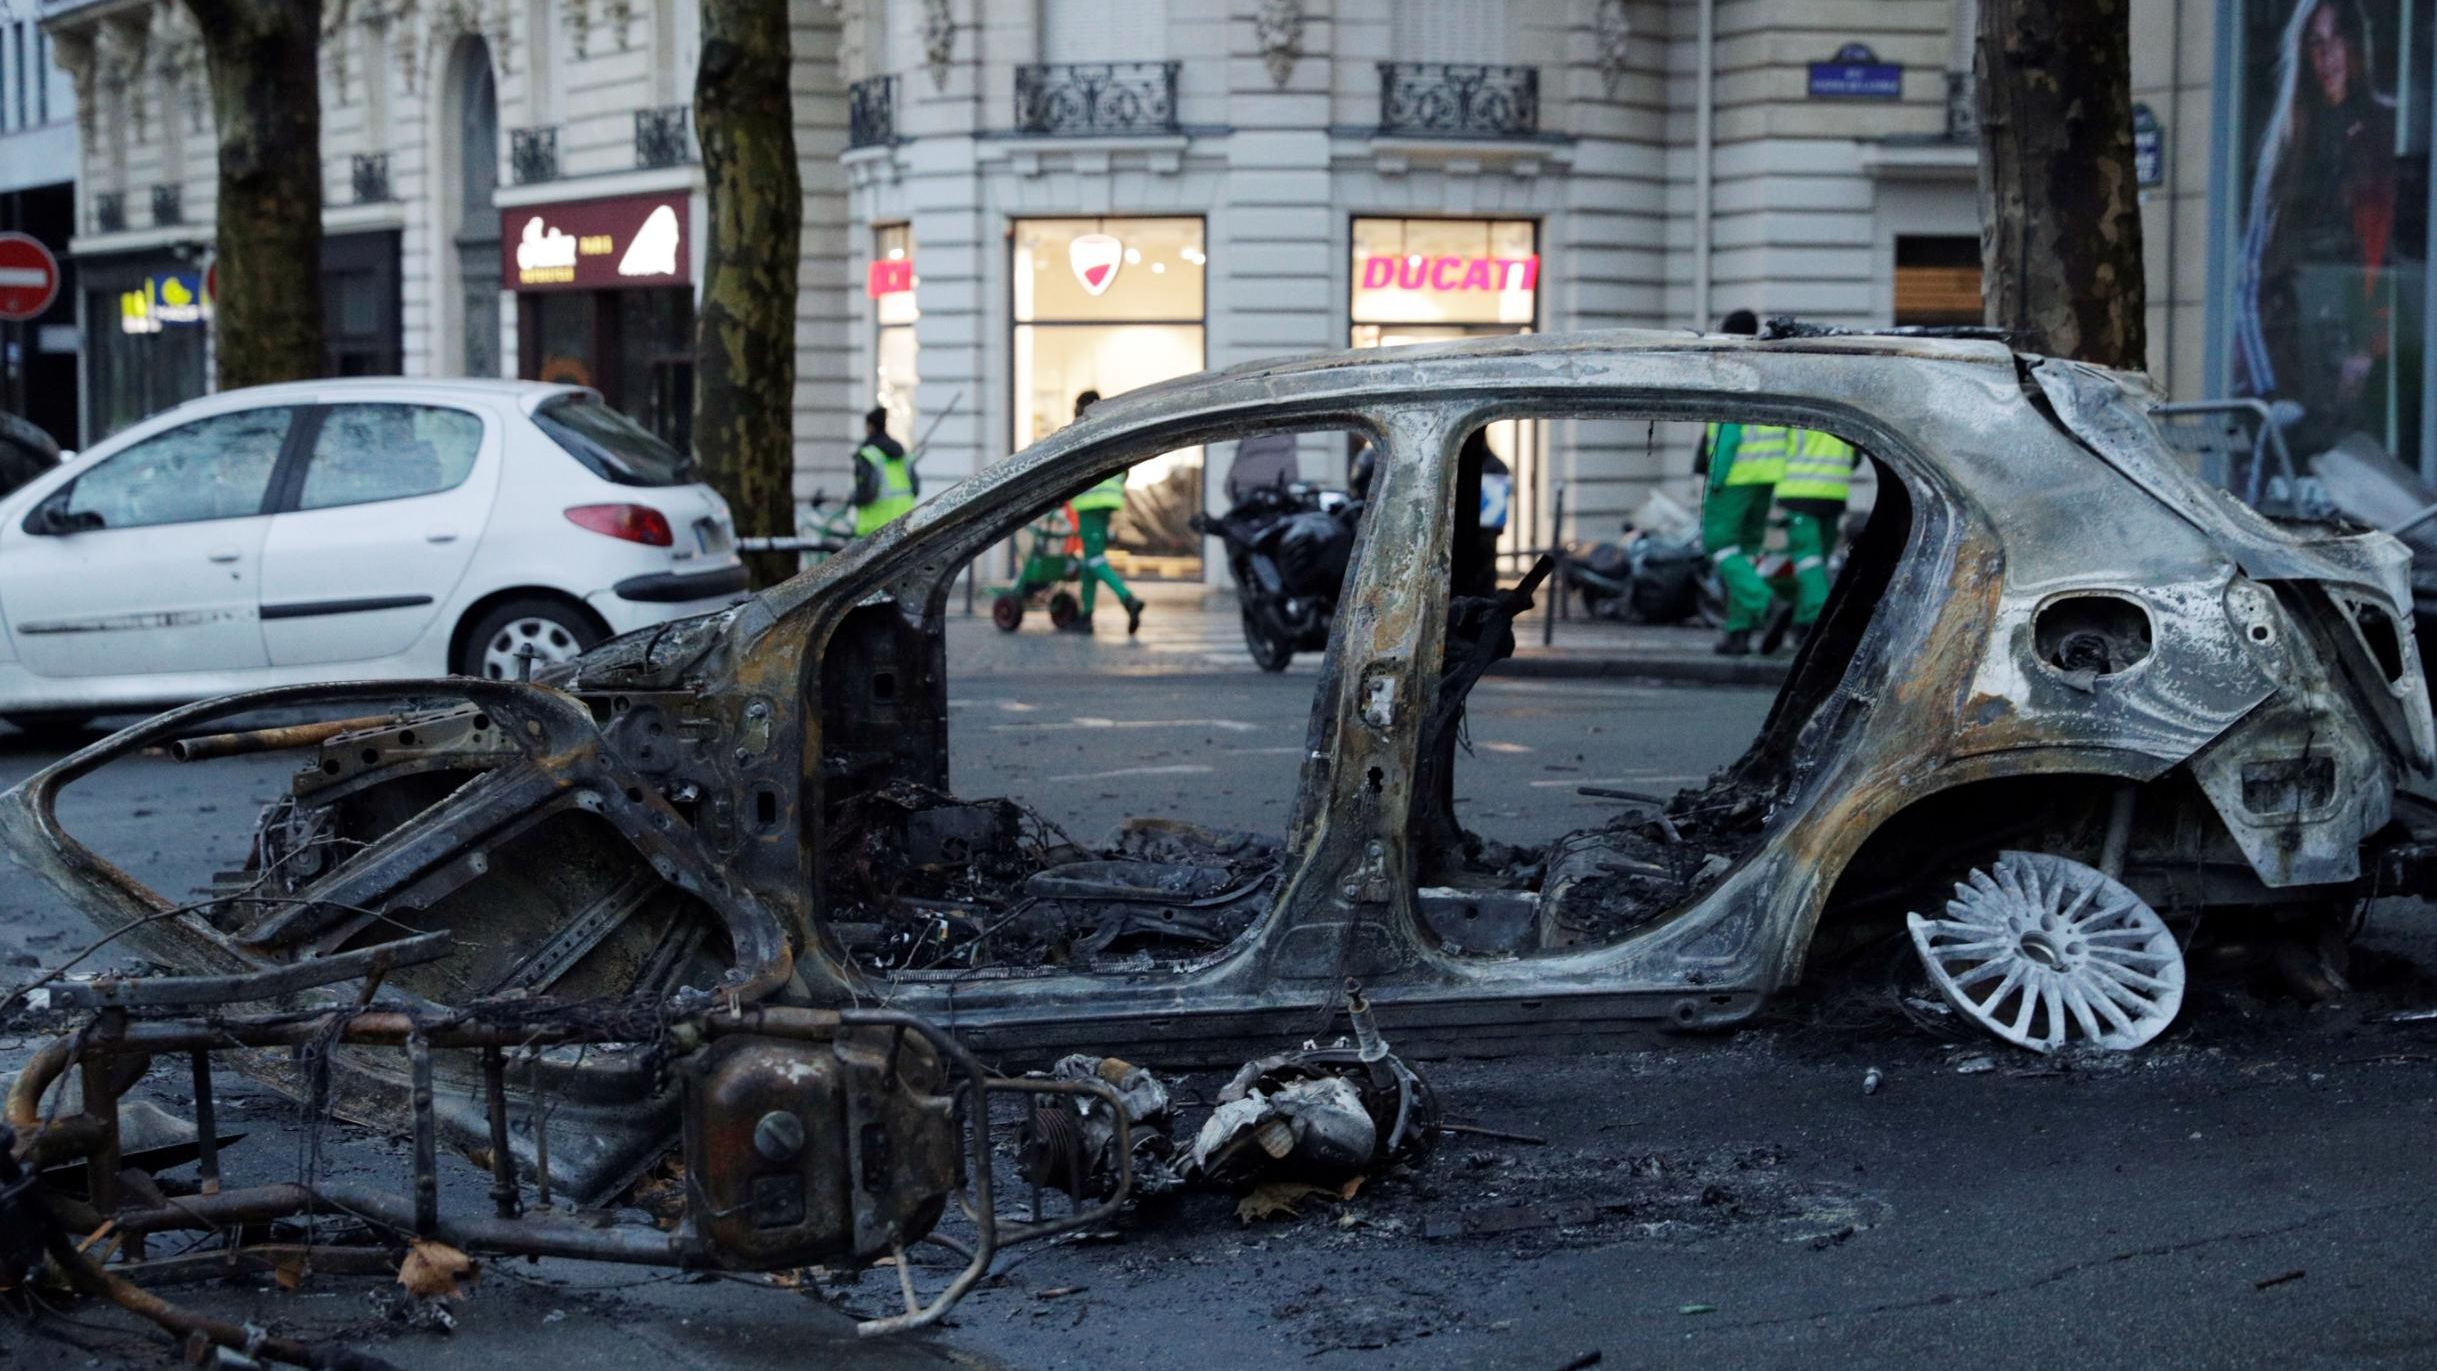 A burned-out car sits in a Paris street the day after riots spread through the city.